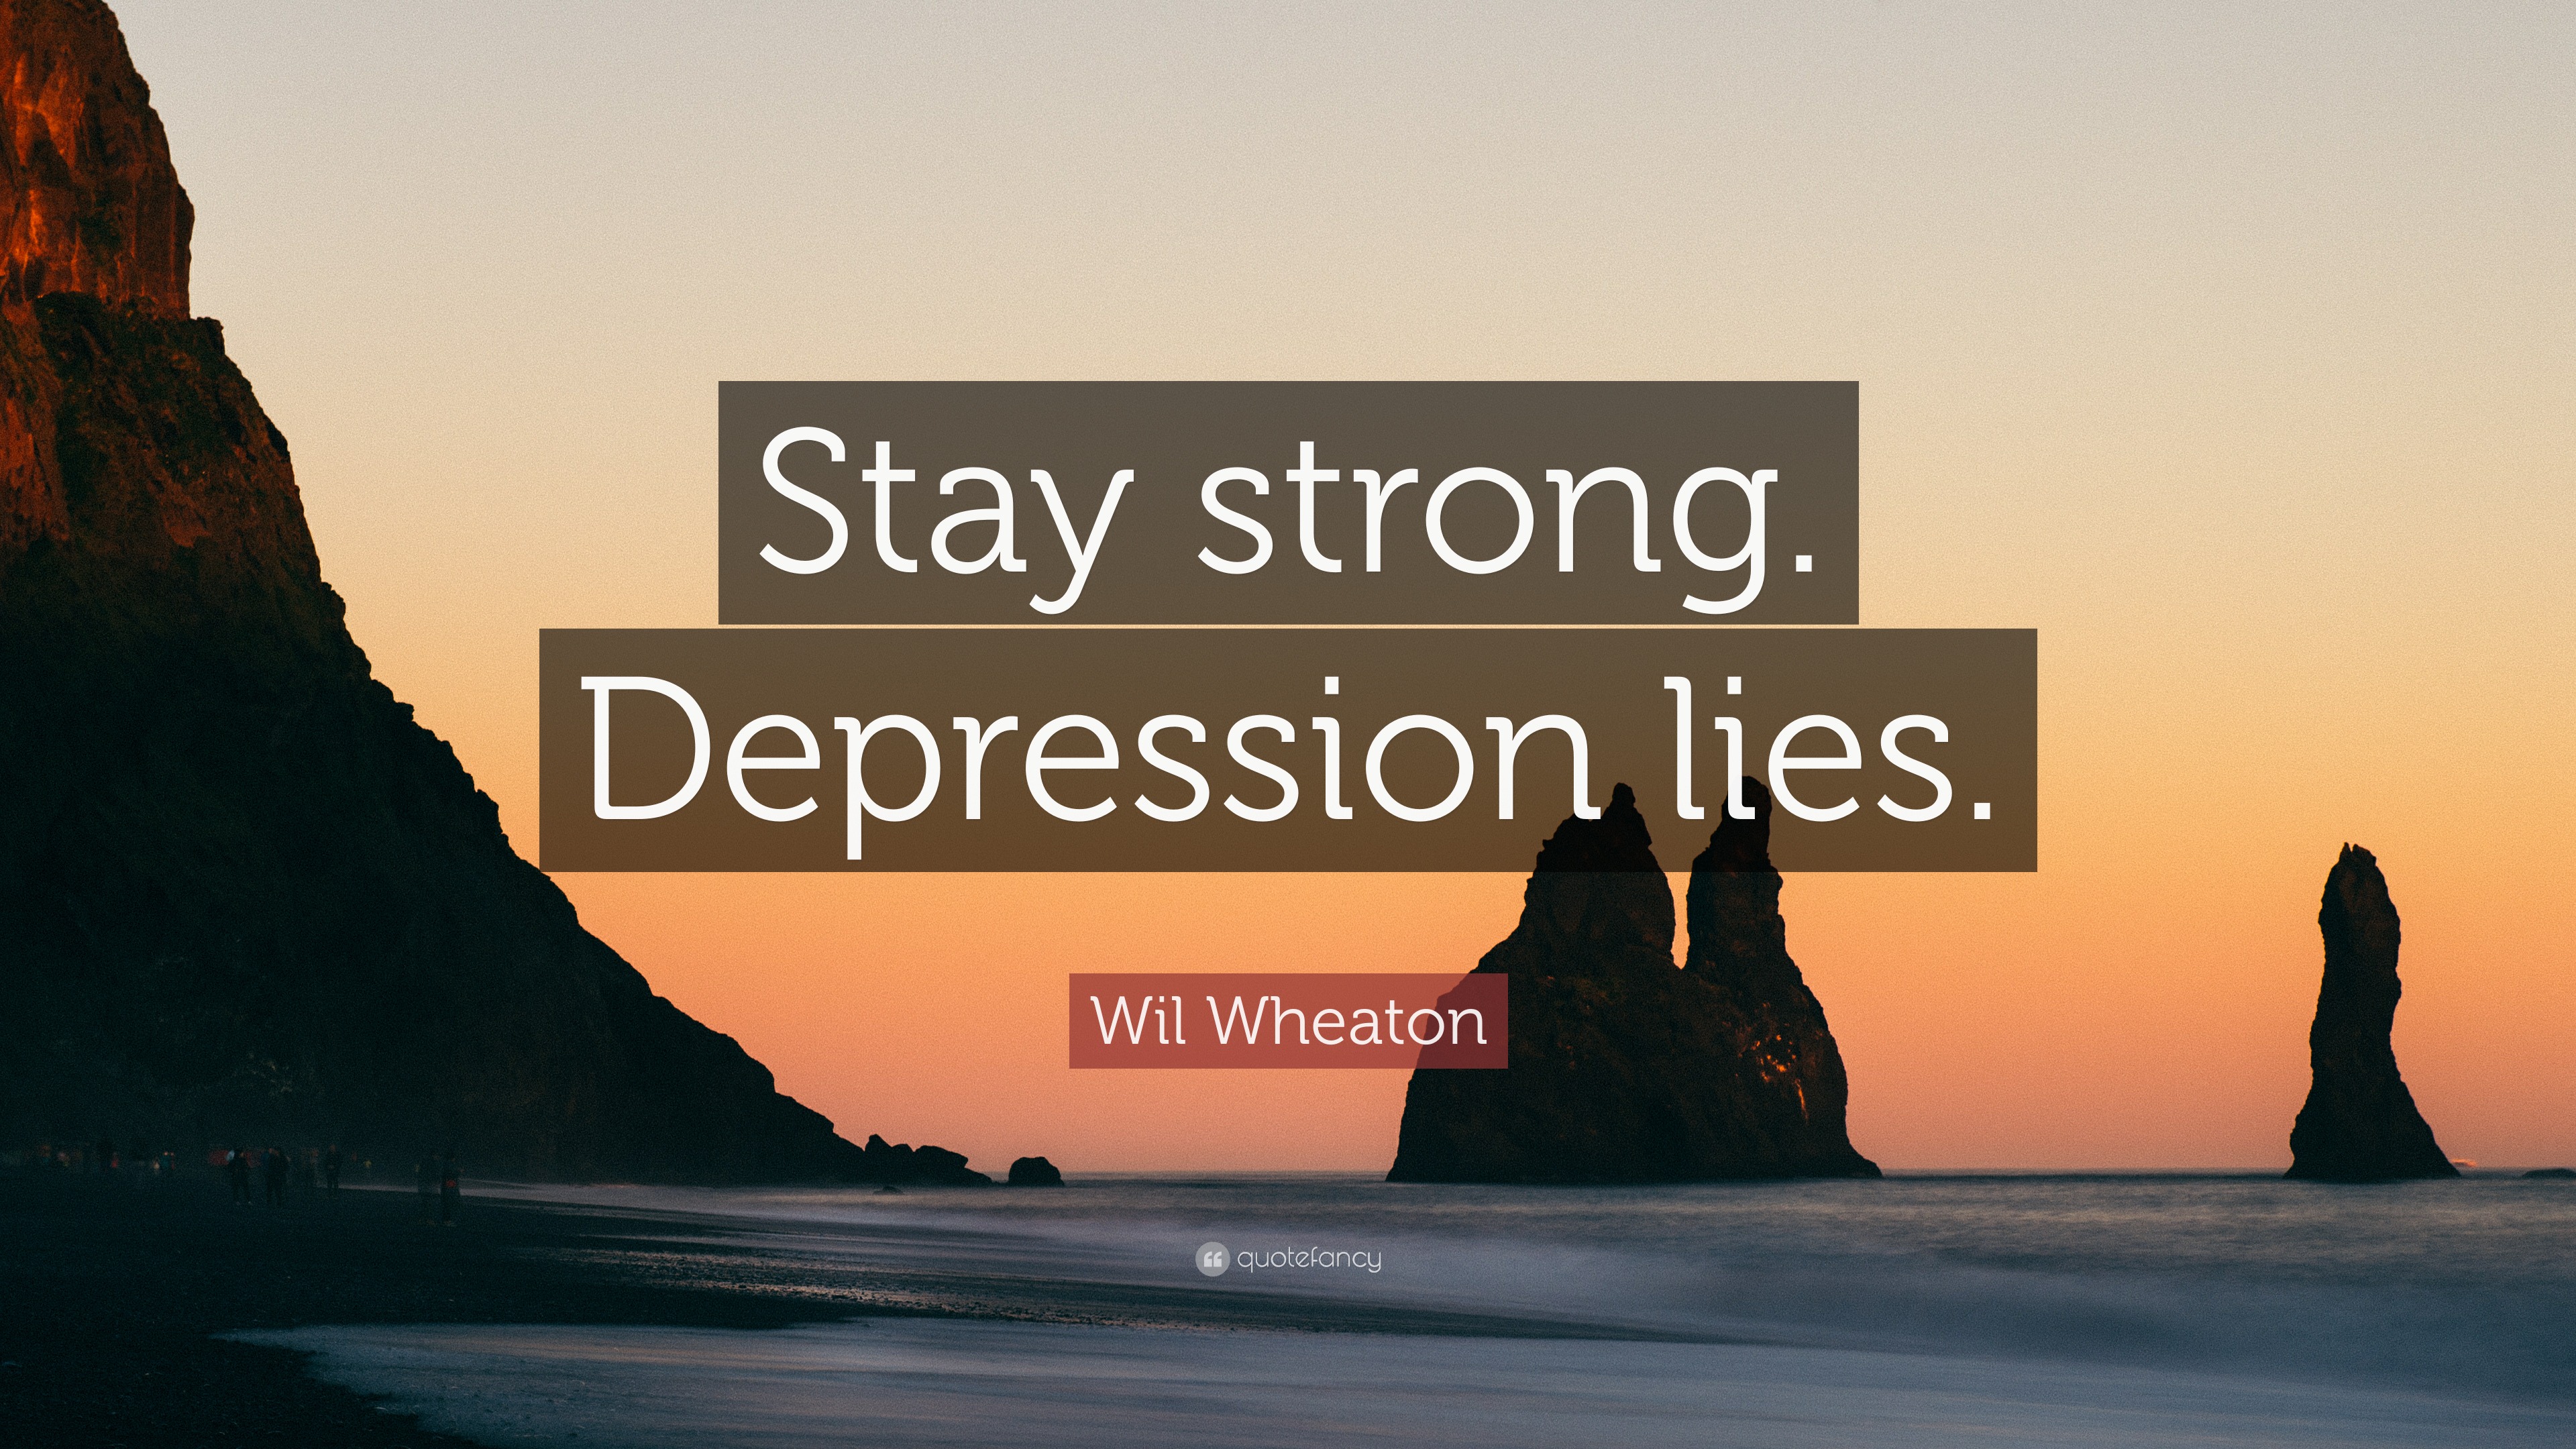 Wil Wheaton Quote: “Stay strong. Depression lies.”